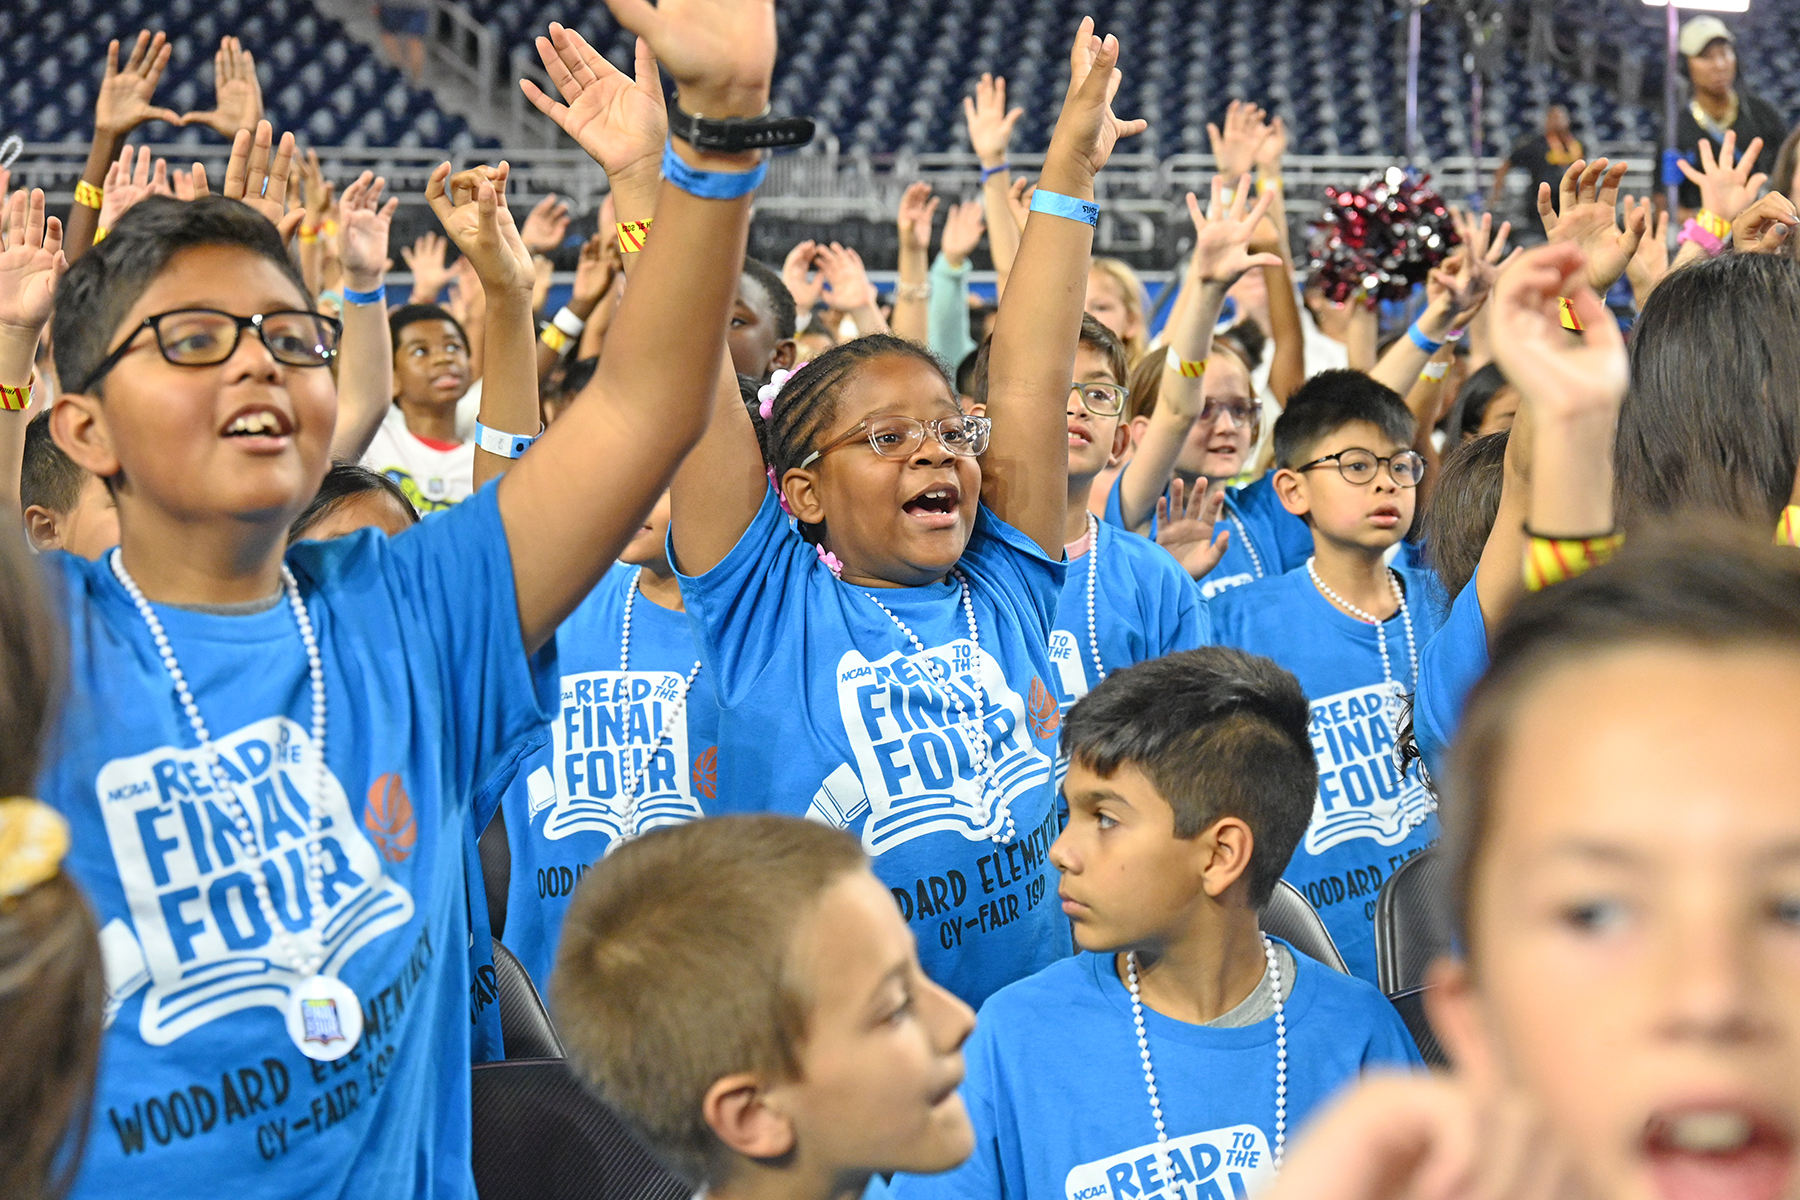 Woodard ES Places in Top Four in Read to the Final Four Contest